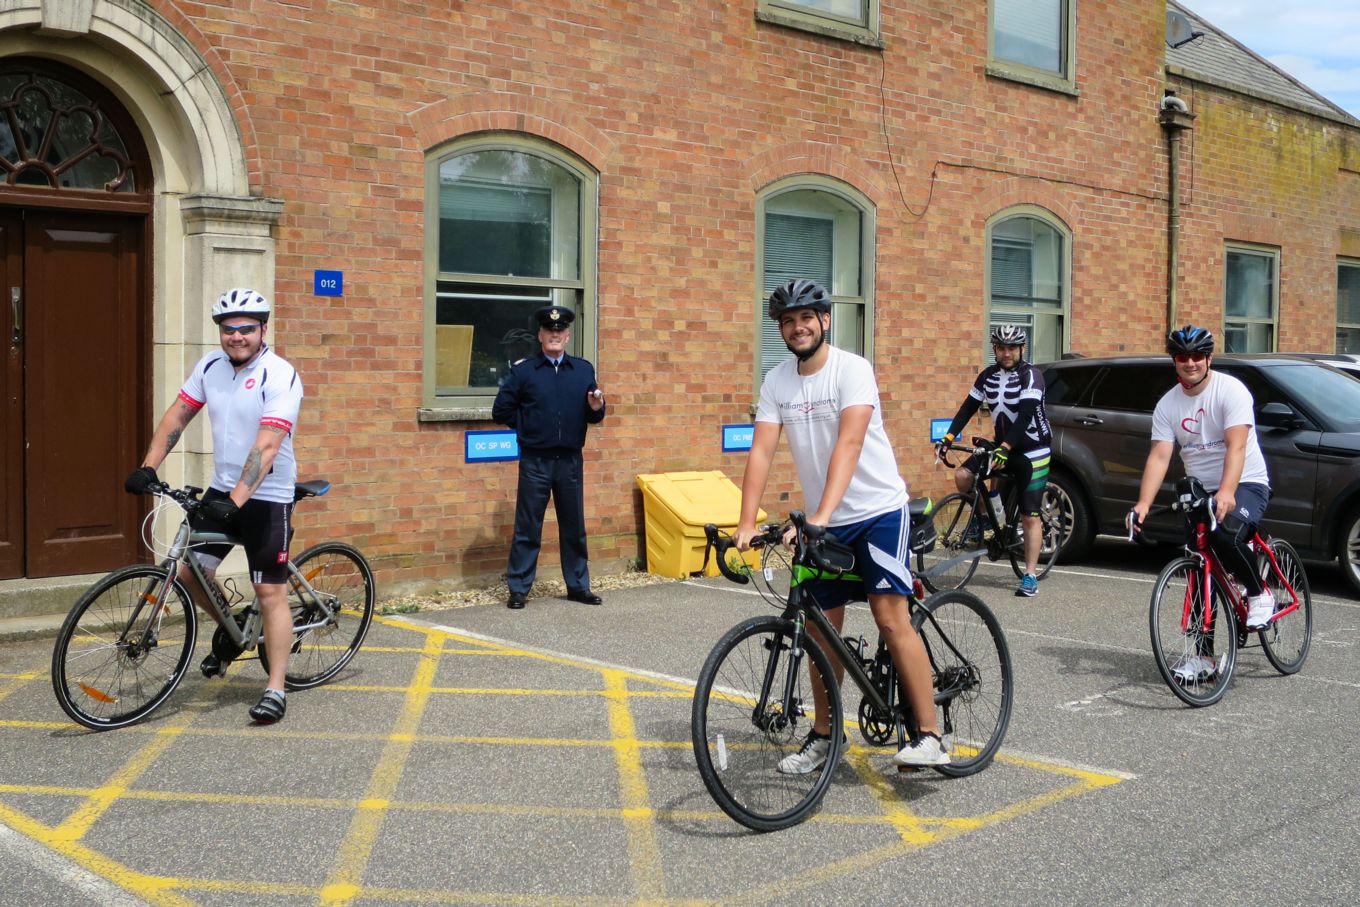 The No 3 Mobile Catering Squadron riders finish the challenge at the Station Warrant Officer's office. SAC Rob Dowie is front and centre. WO Greening stands at the rear